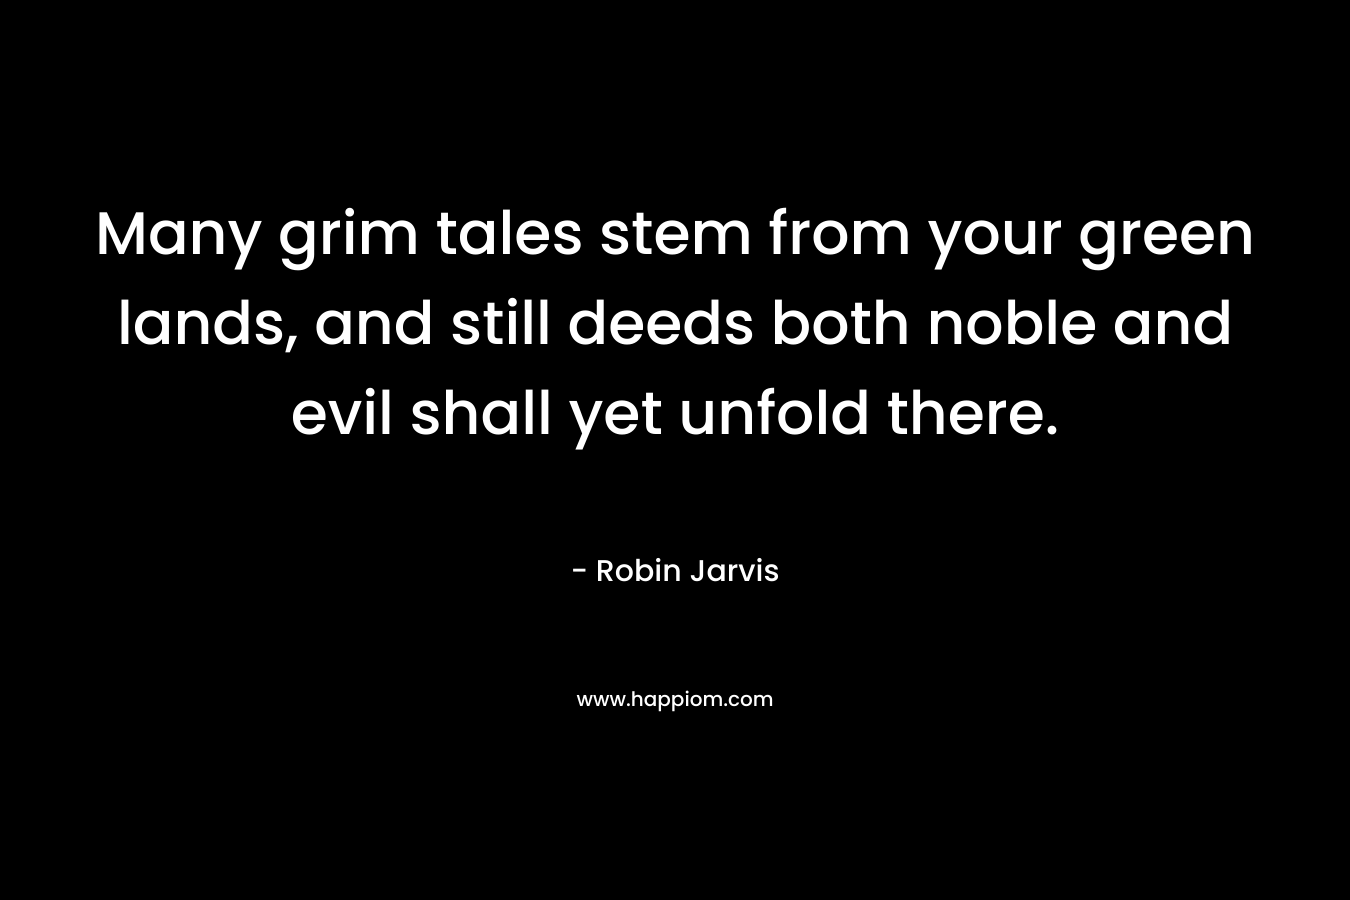 Many grim tales stem from your green lands, and still deeds both noble and evil shall yet unfold there. – Robin Jarvis